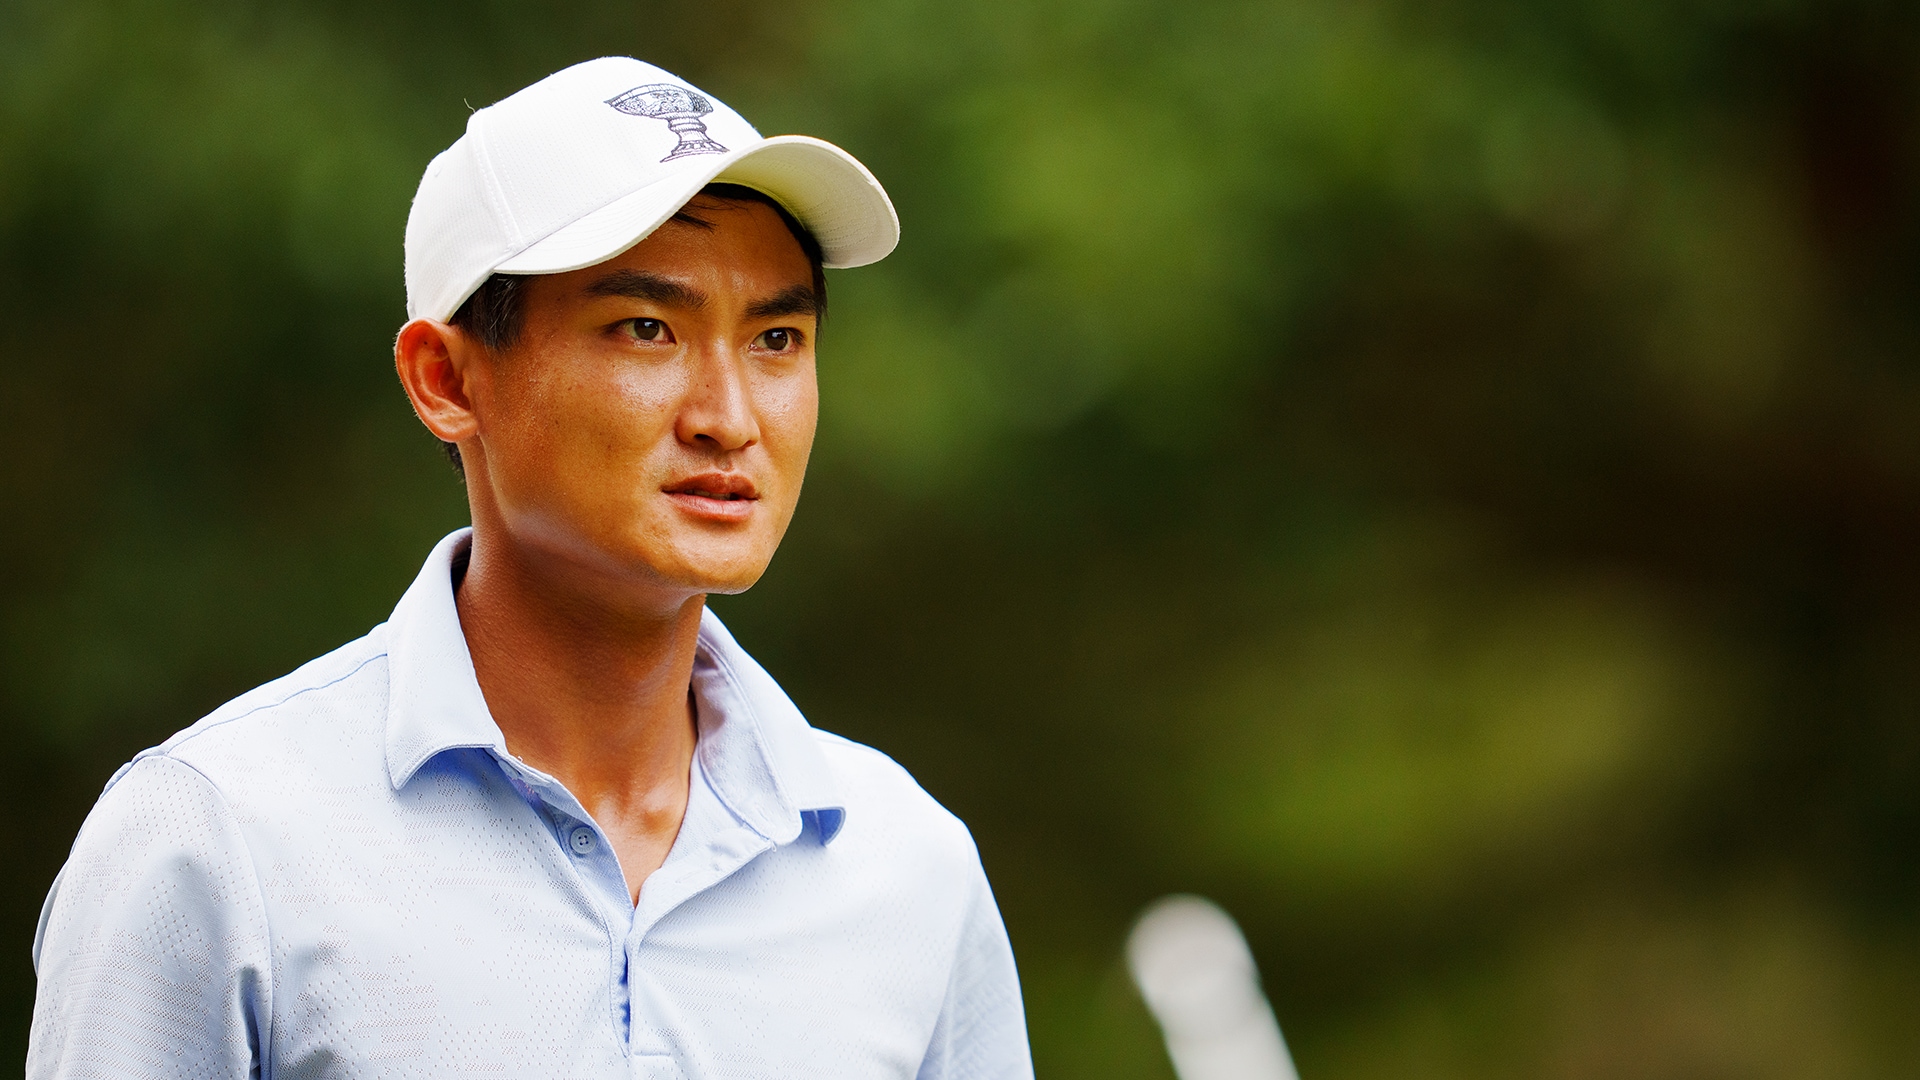 A cut nearly forced Q-School WD, but Charles Wang has done well to fight through pain